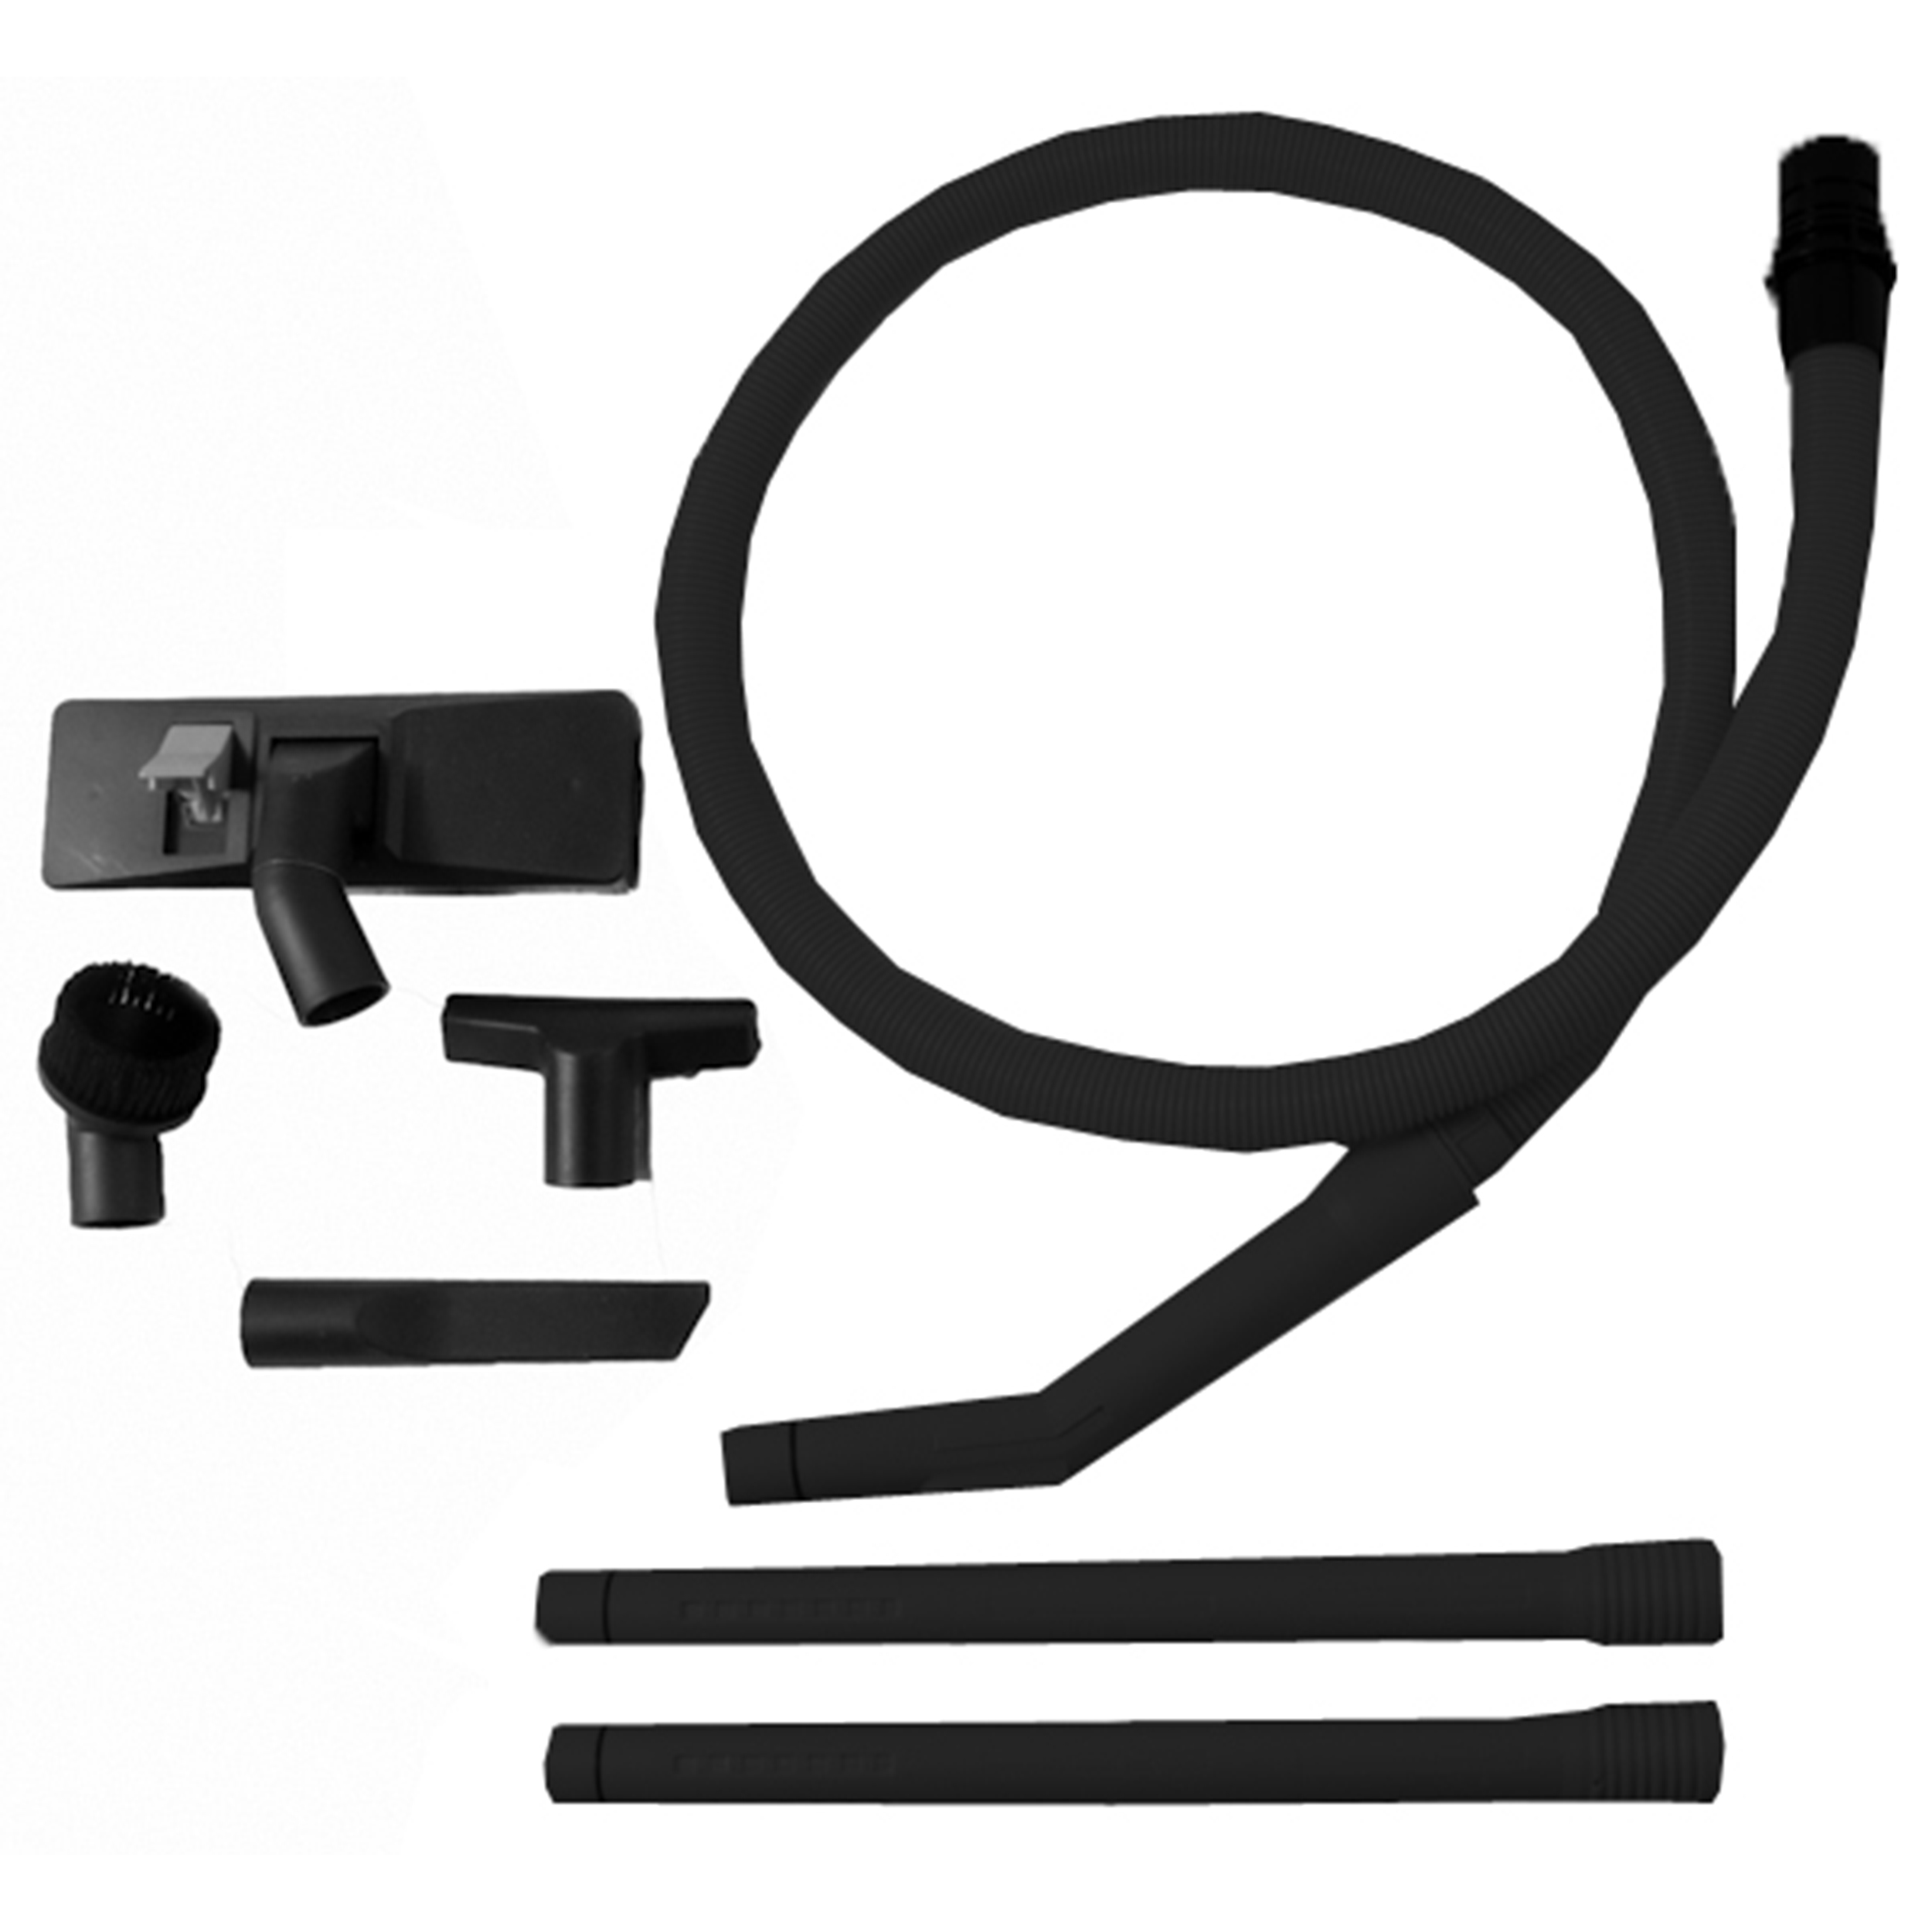 Tool And Hose Accessory Kit, S7toolkit